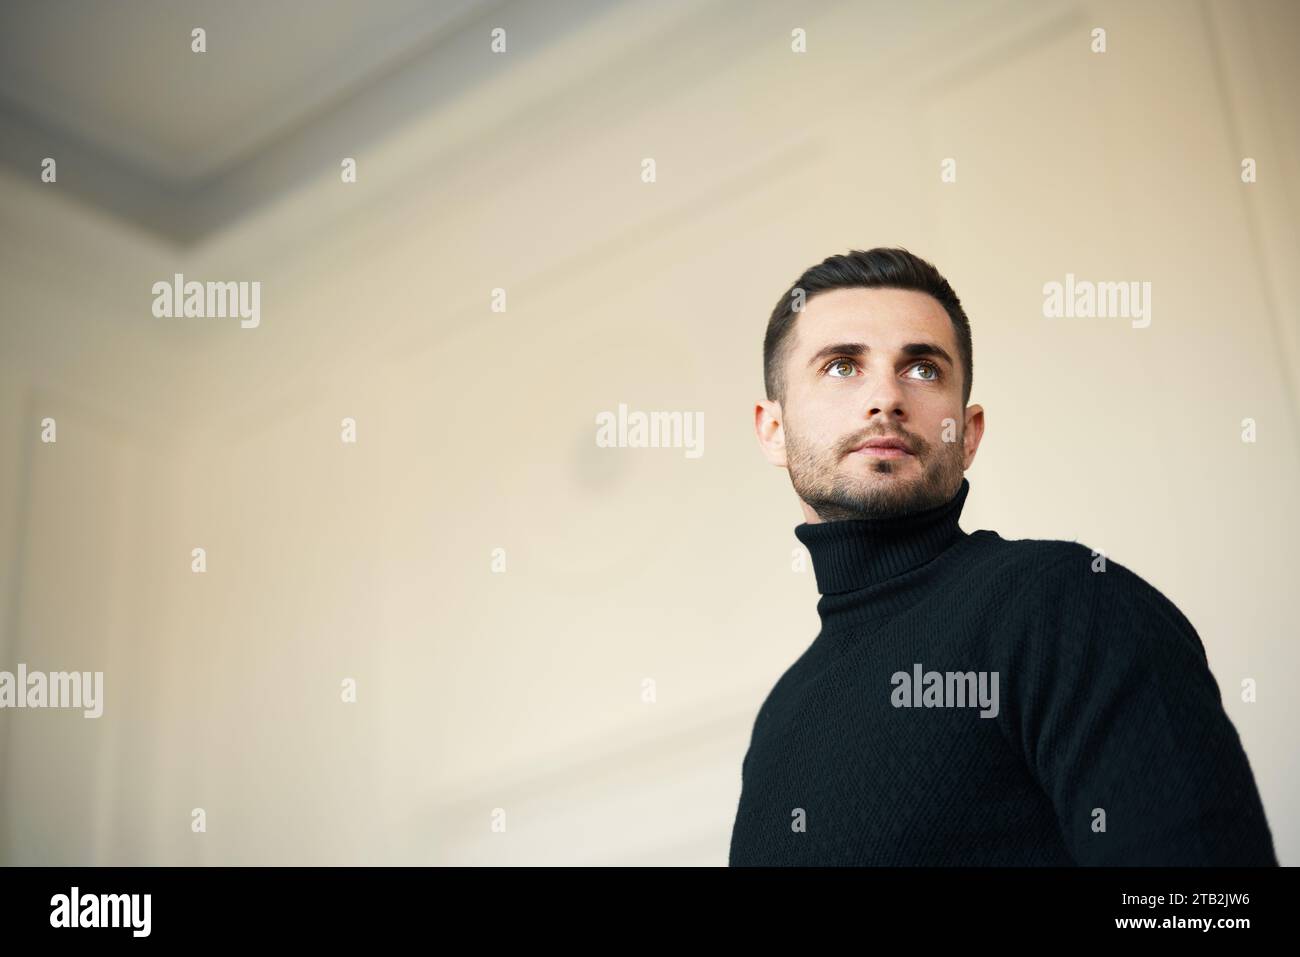 Pensive man in a black turtleneck looking upward in a spacious, light-filled room. Male beauty portrait Stock Photo